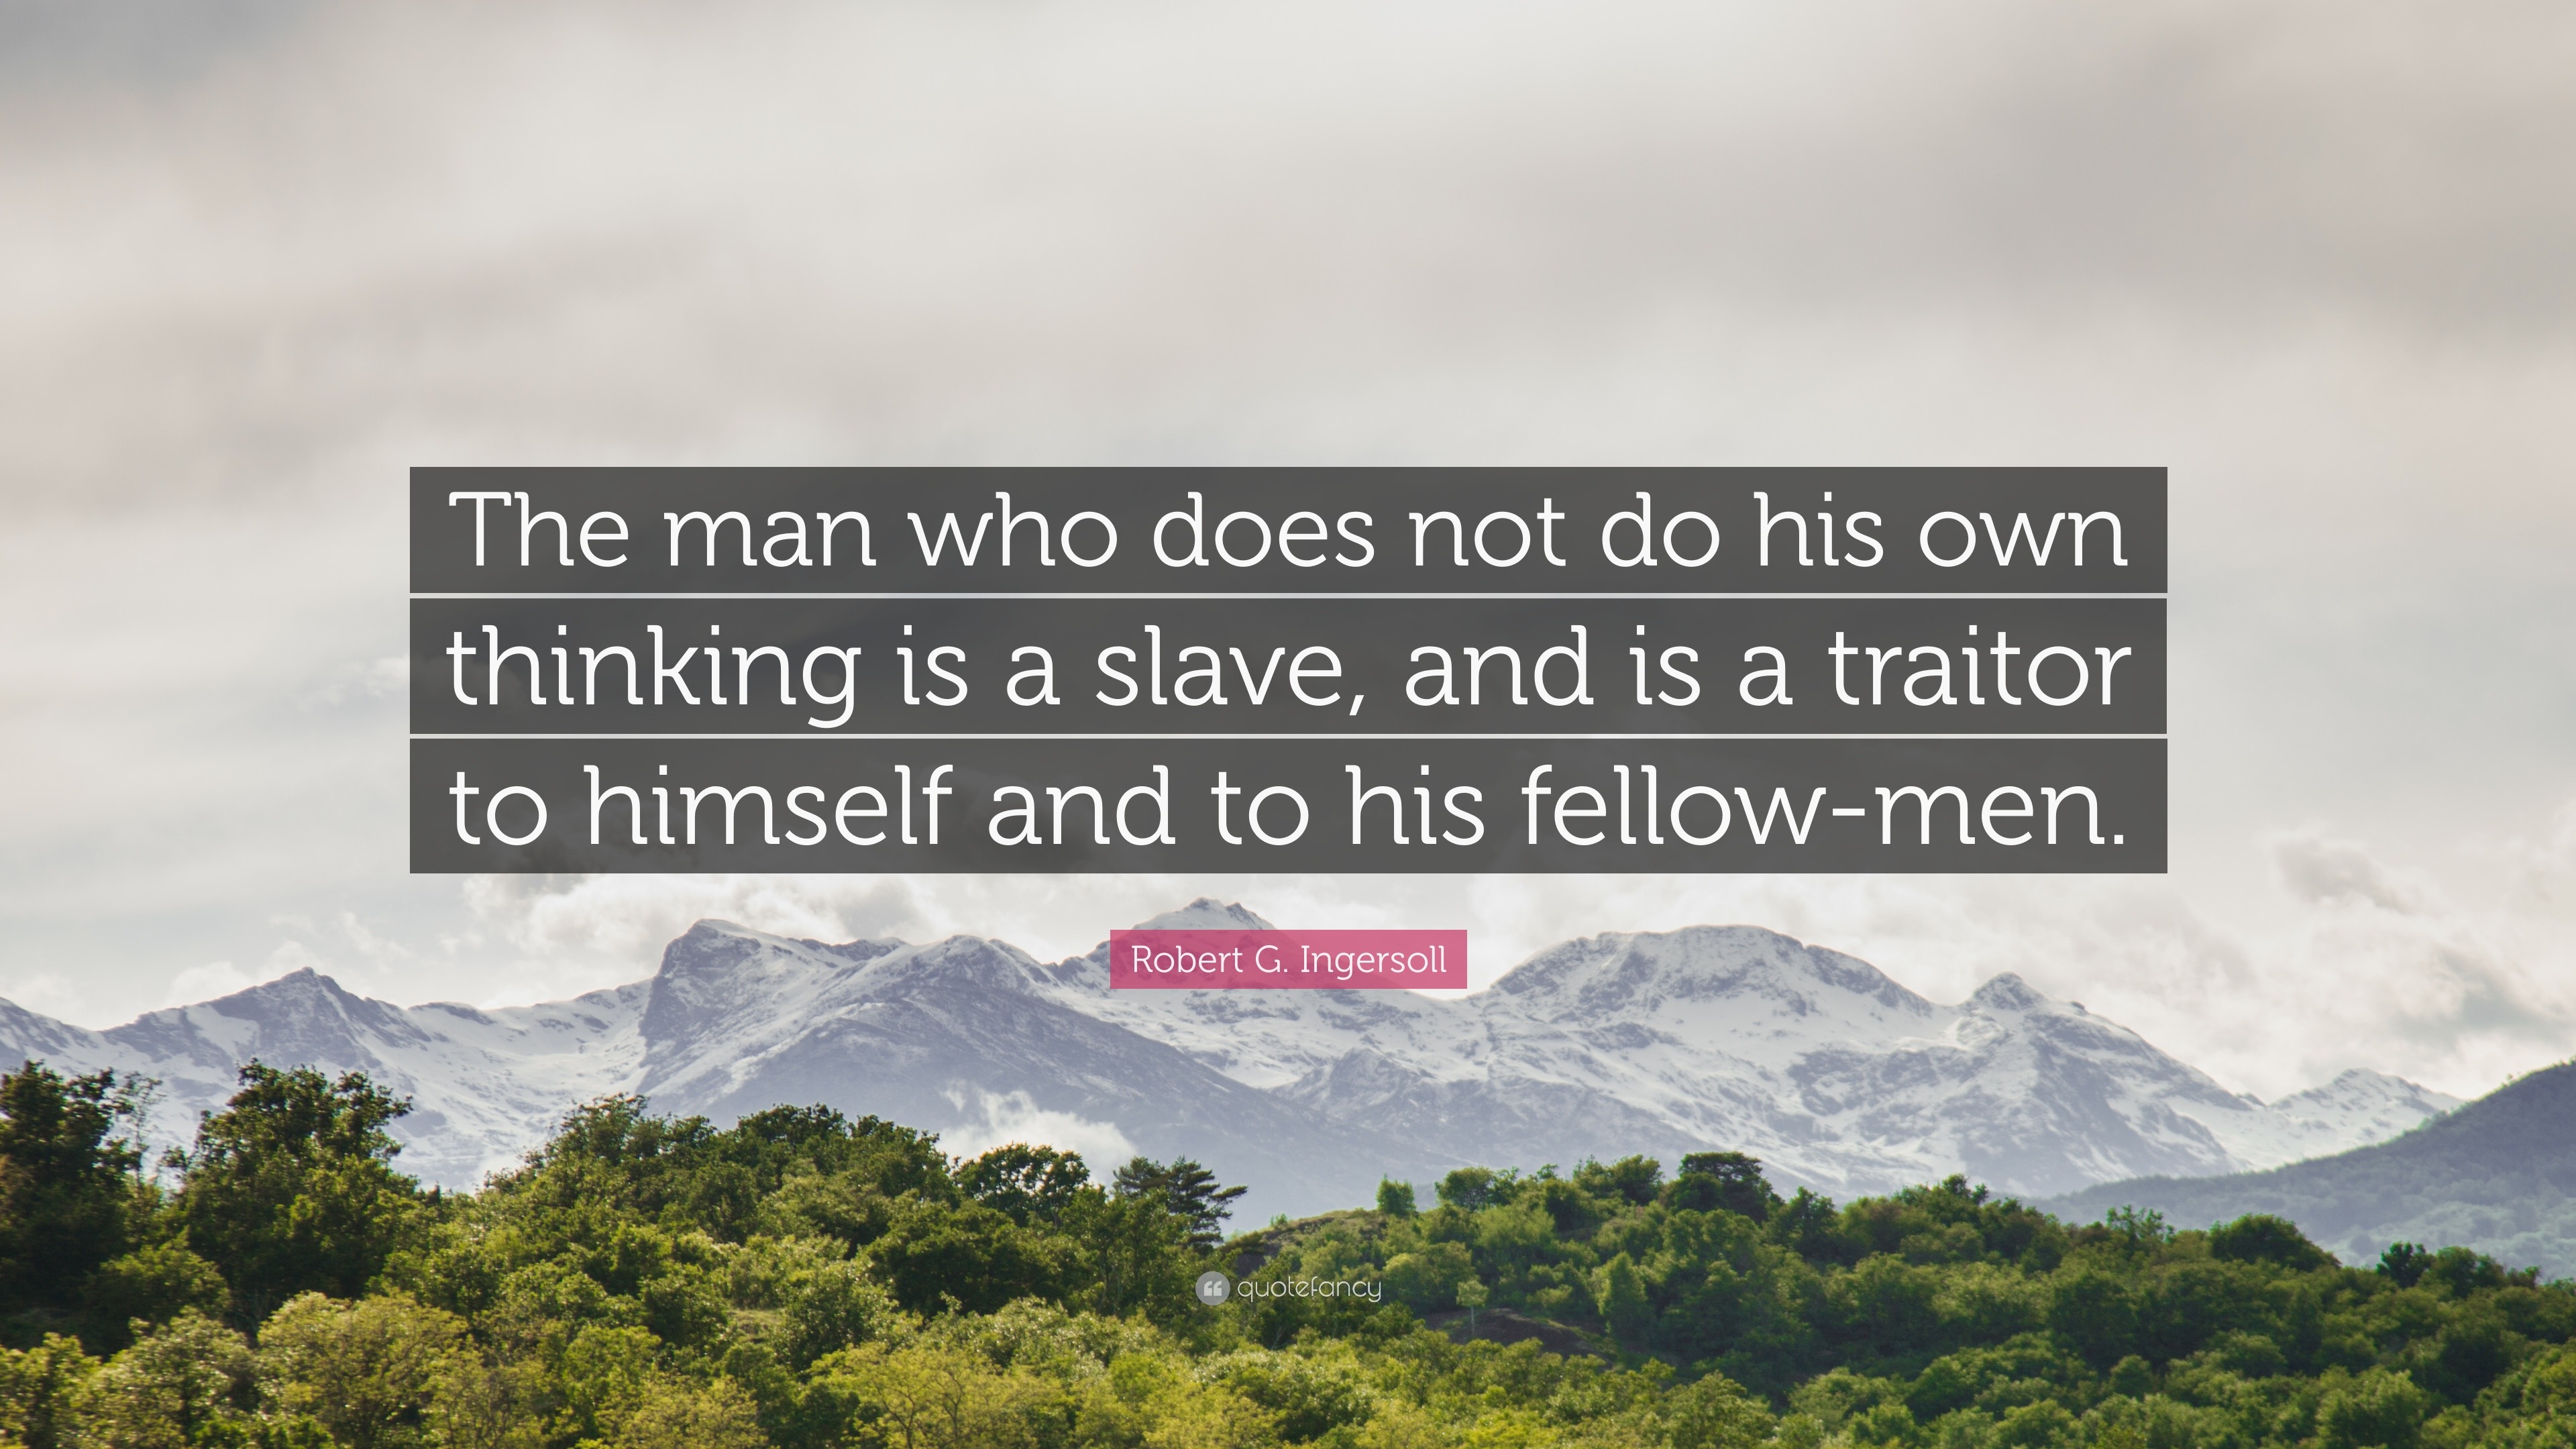 Robert G. Ingersoll Quote: “The man who does not do his own thinking is ...